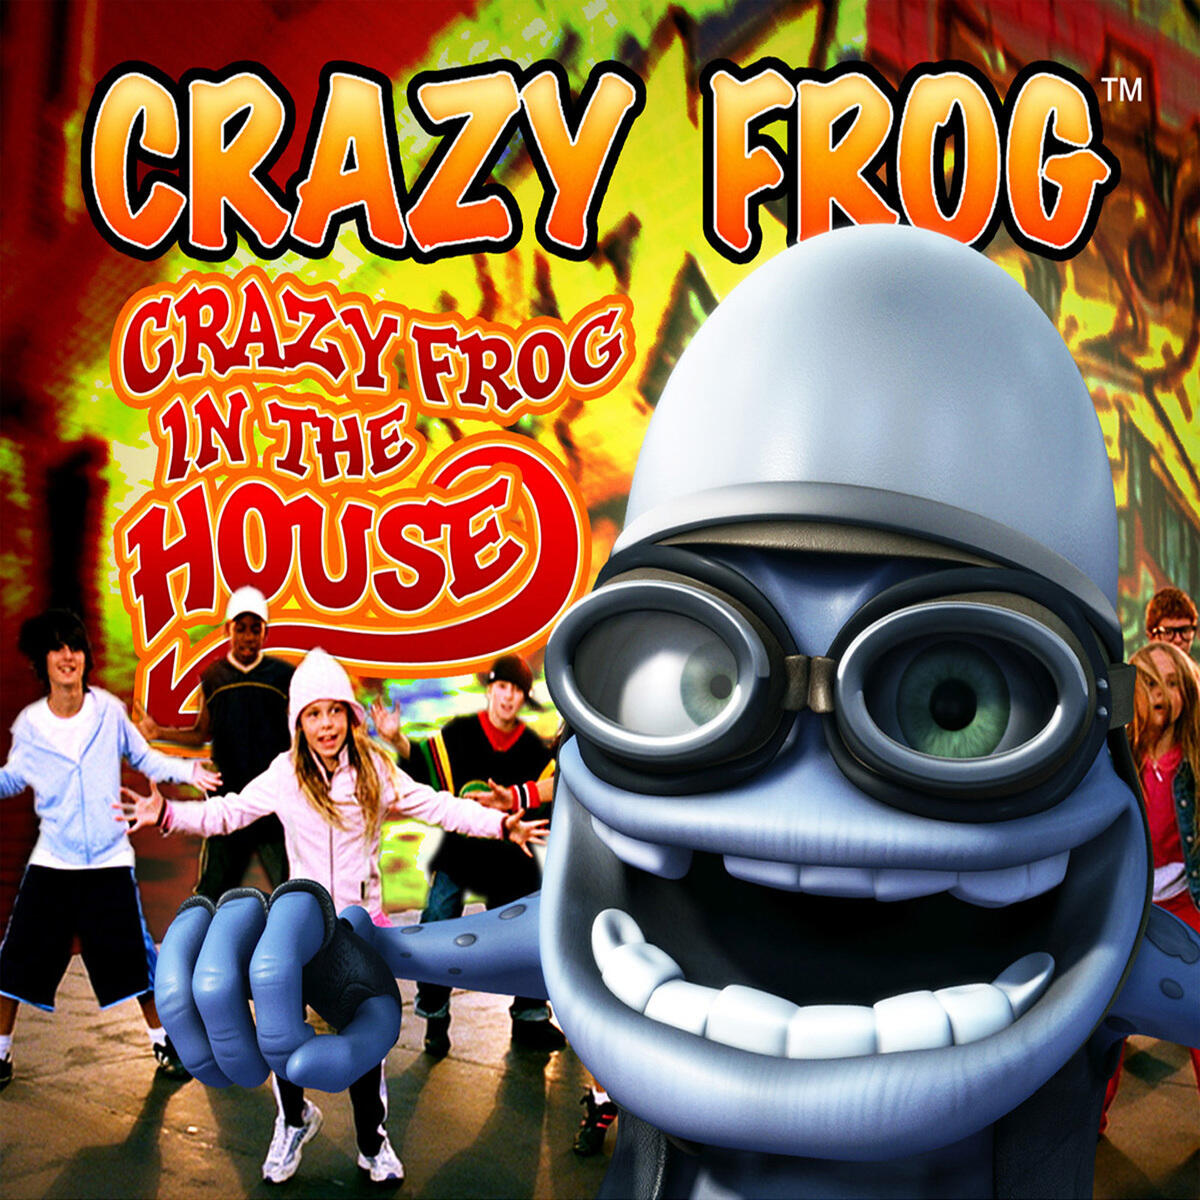 Crazy Frog Radio: Listen to Free Music & Get The Latest Info | iHeartRadio